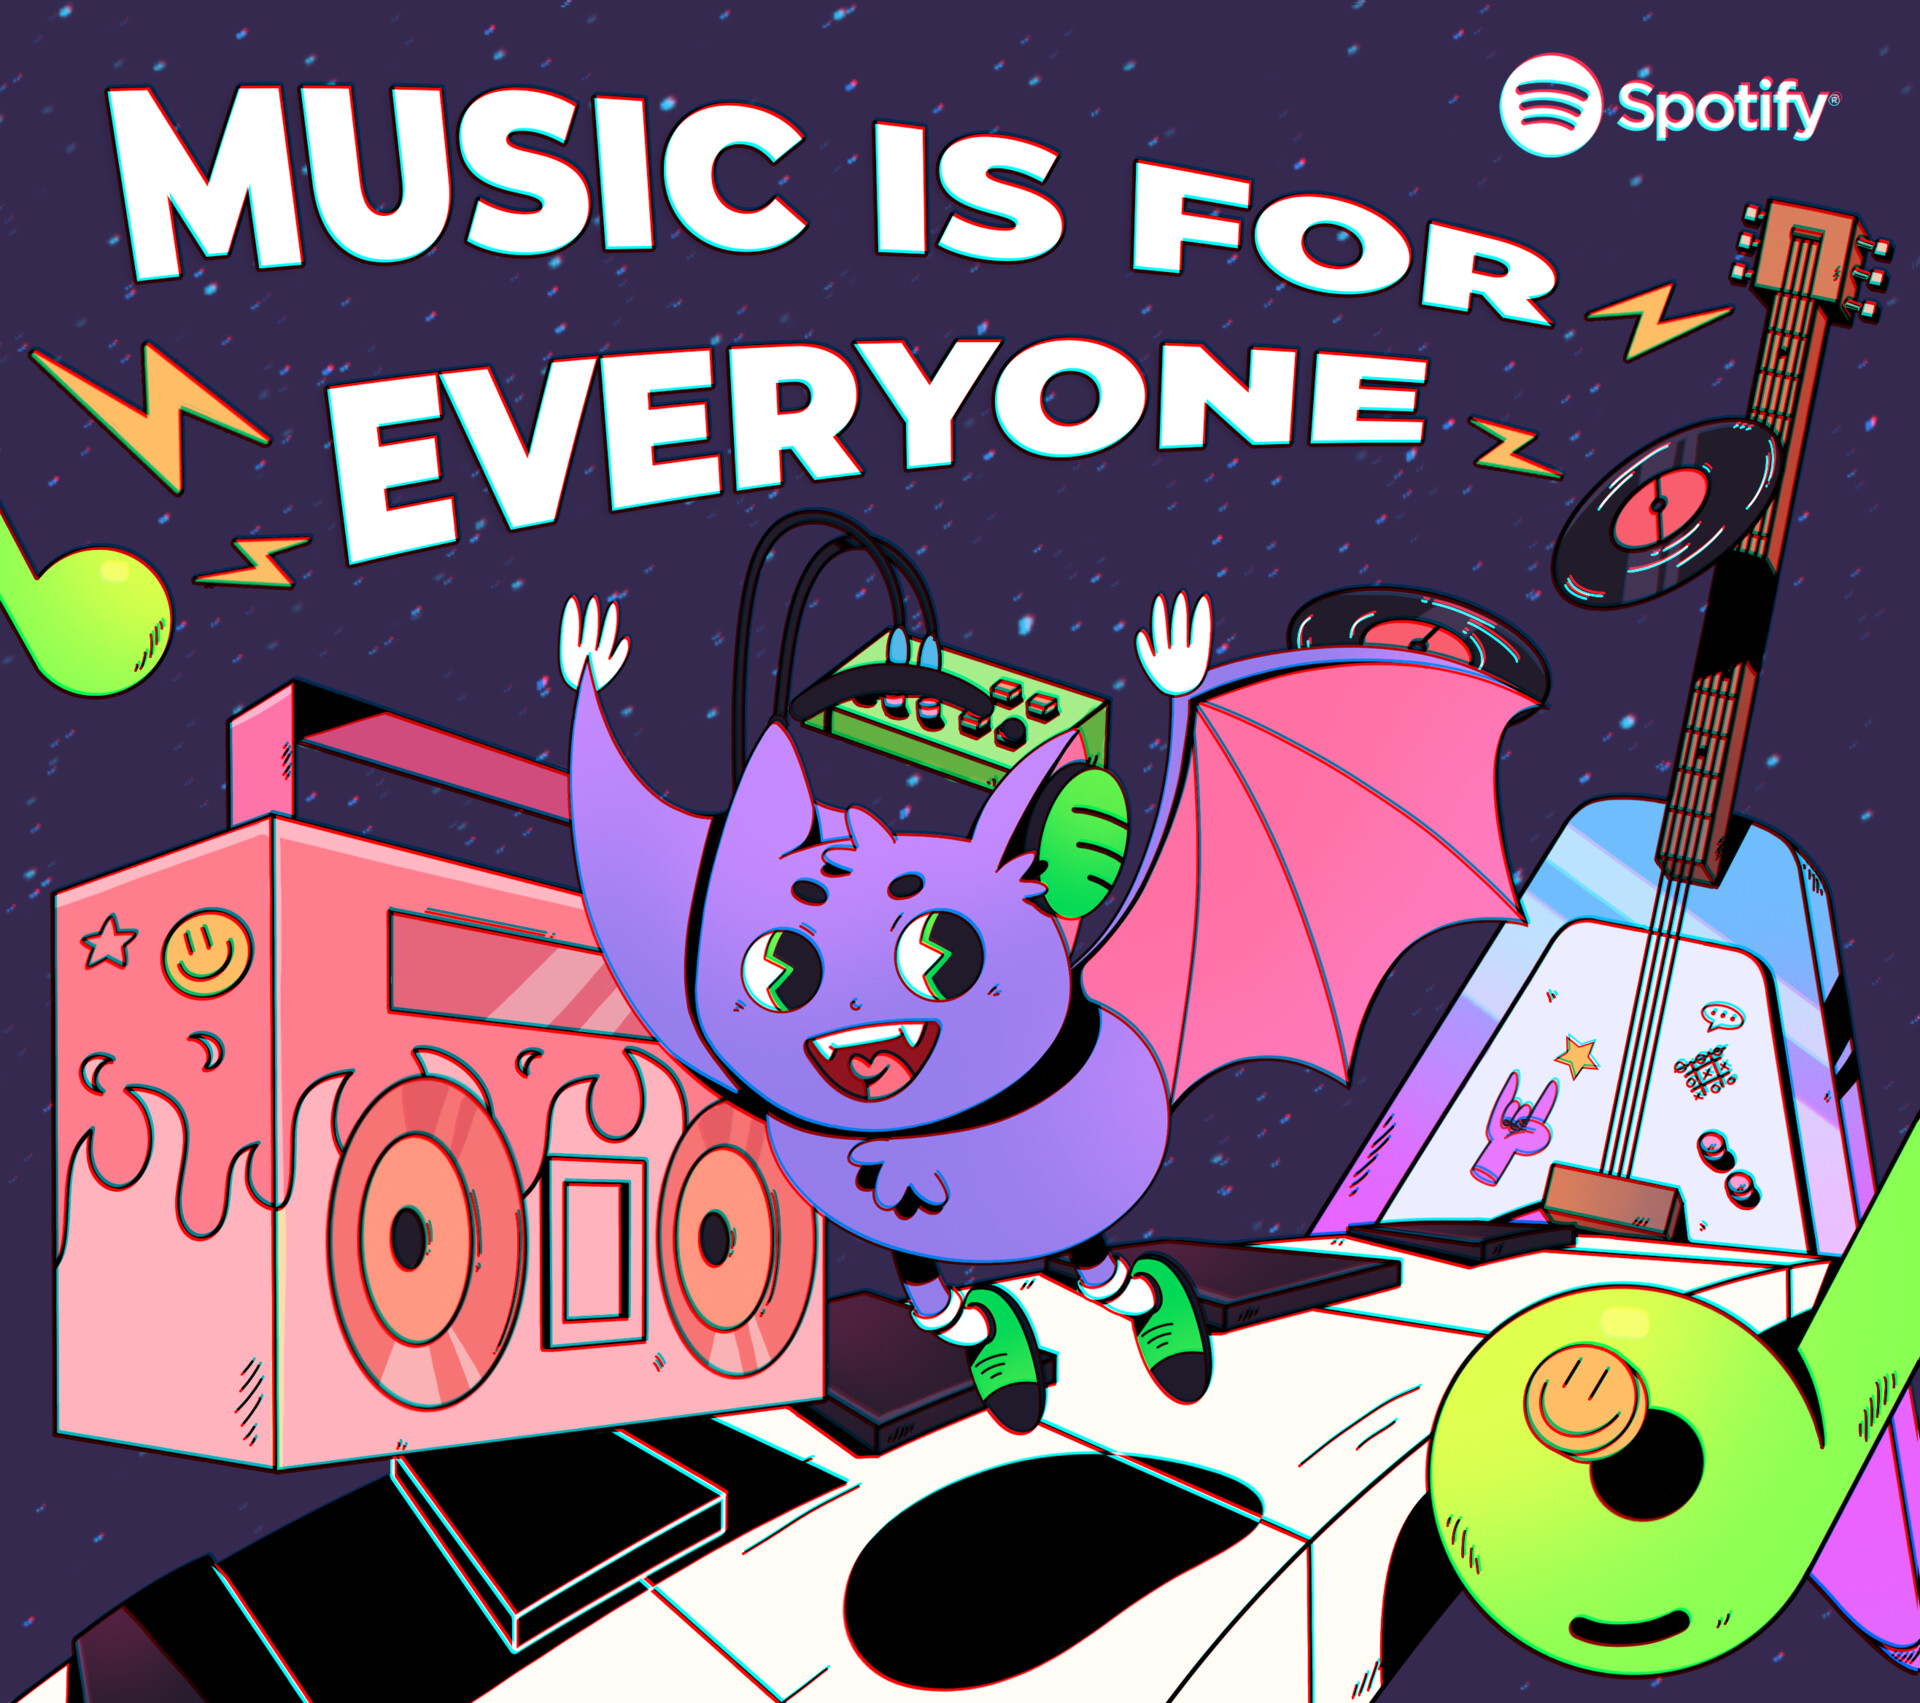 ArtStation - spotify's new mascot campaign (unofficial)